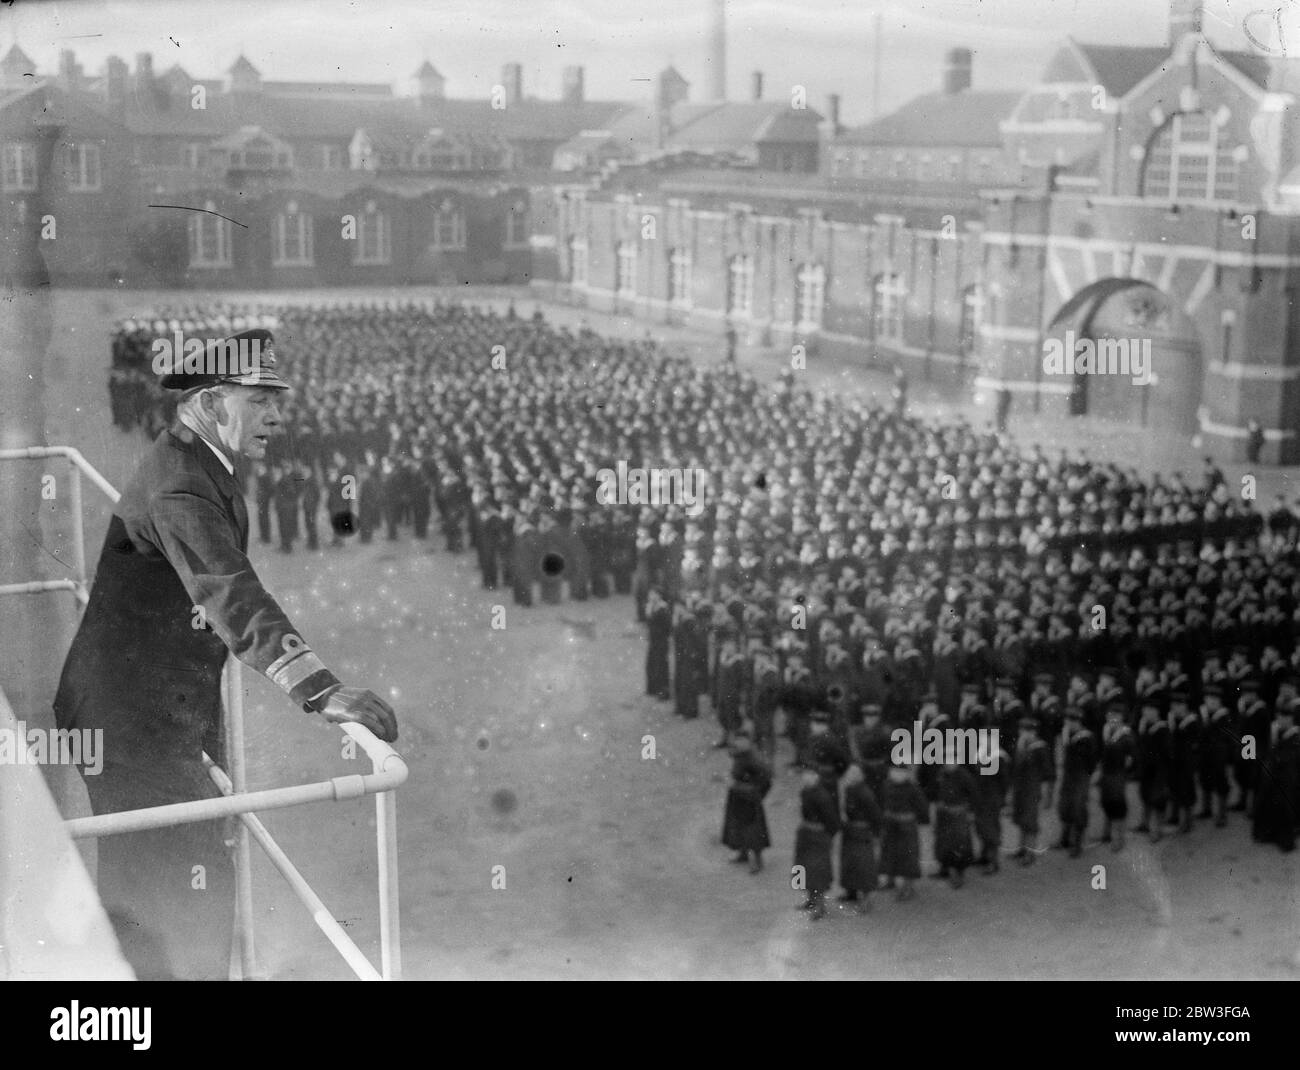 Commodore of Royal Naval barracks says ' goodbye ' at Chatham . Rear Admiral R C Davenport said goodbye at the Royal Naval barracks at Chatham , after two years as Commodore . He made a farewell speech on the parade ground and then took the salute at the march past . 29 January 1935 Stock Photo